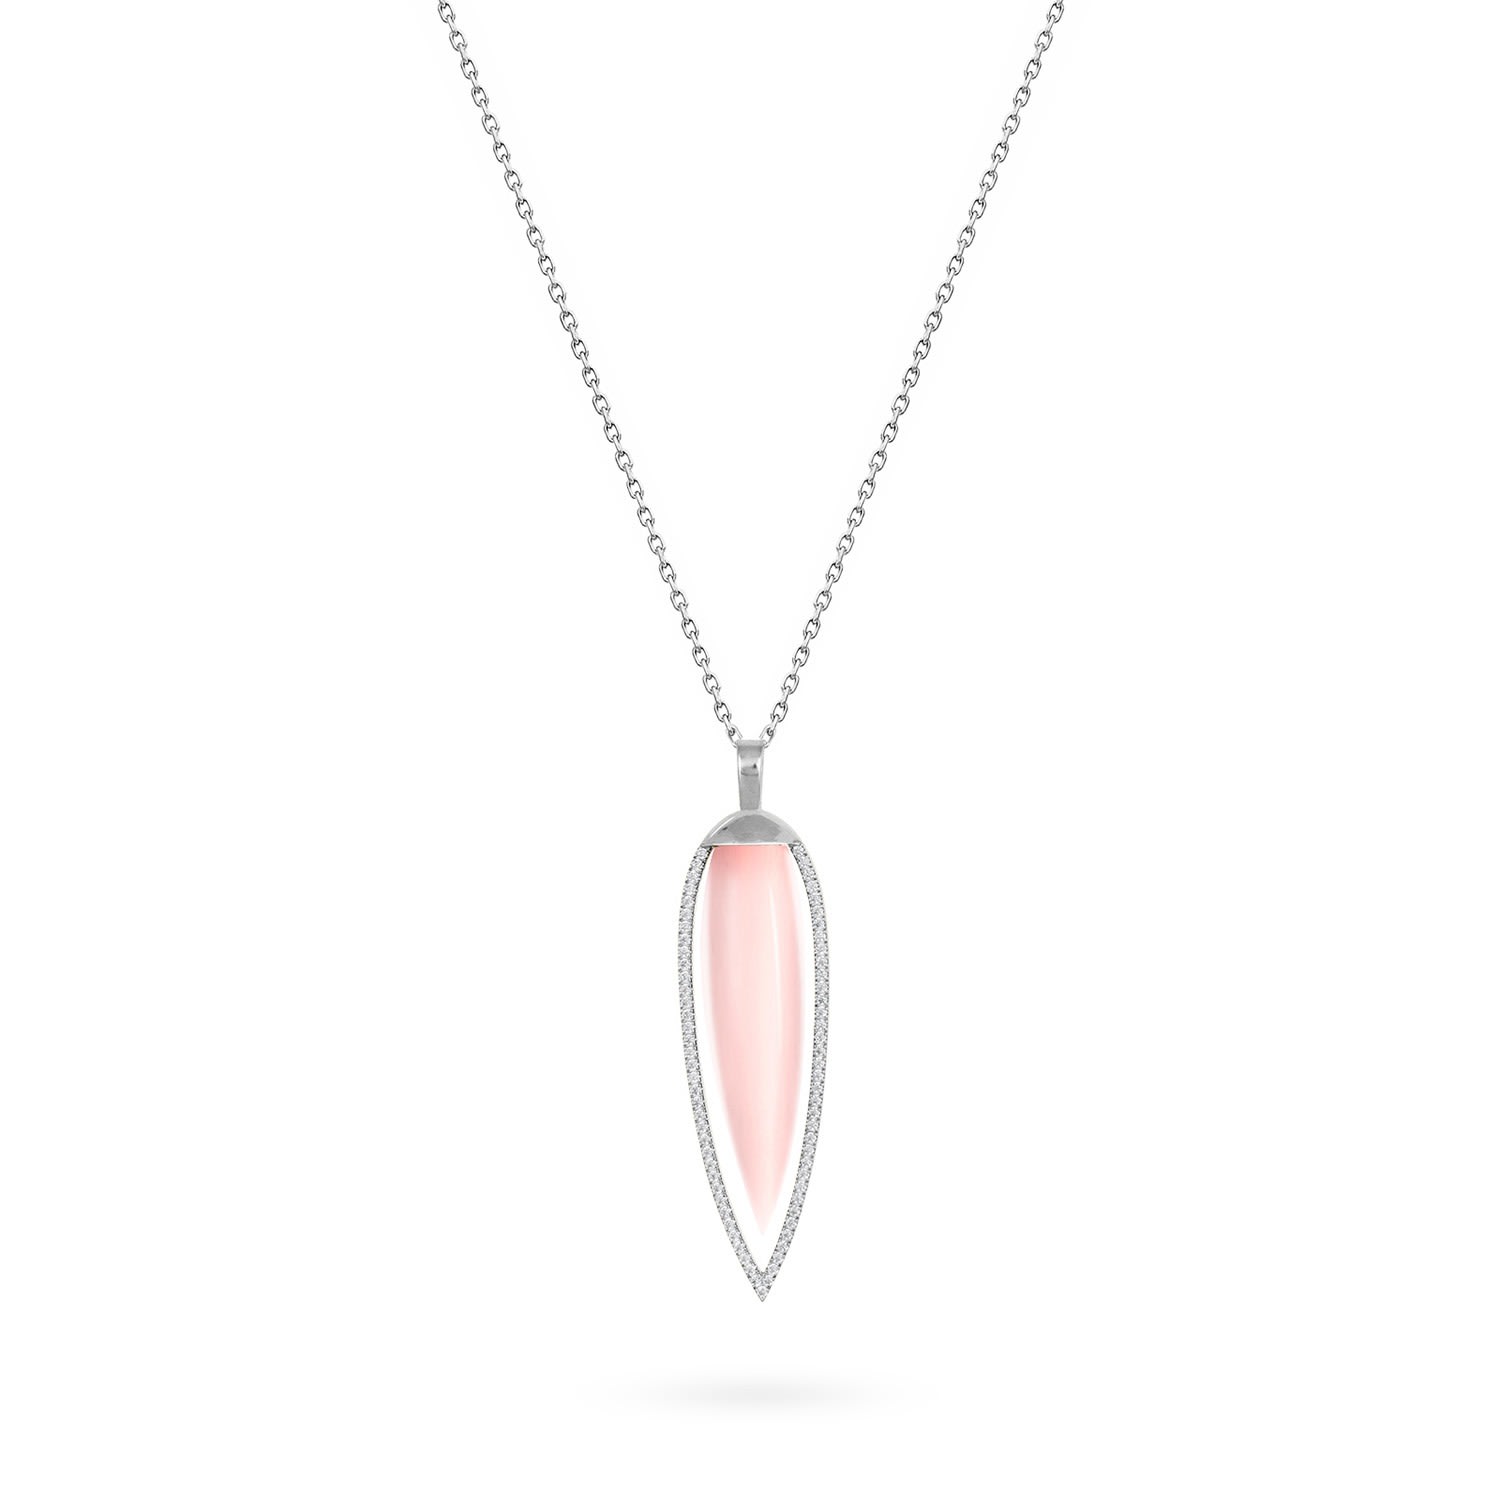 Women’s Necklace Siena On Precious Stone, 18K White Gold And Diamonds Pink Mother Of Pearl Aquae Jewels